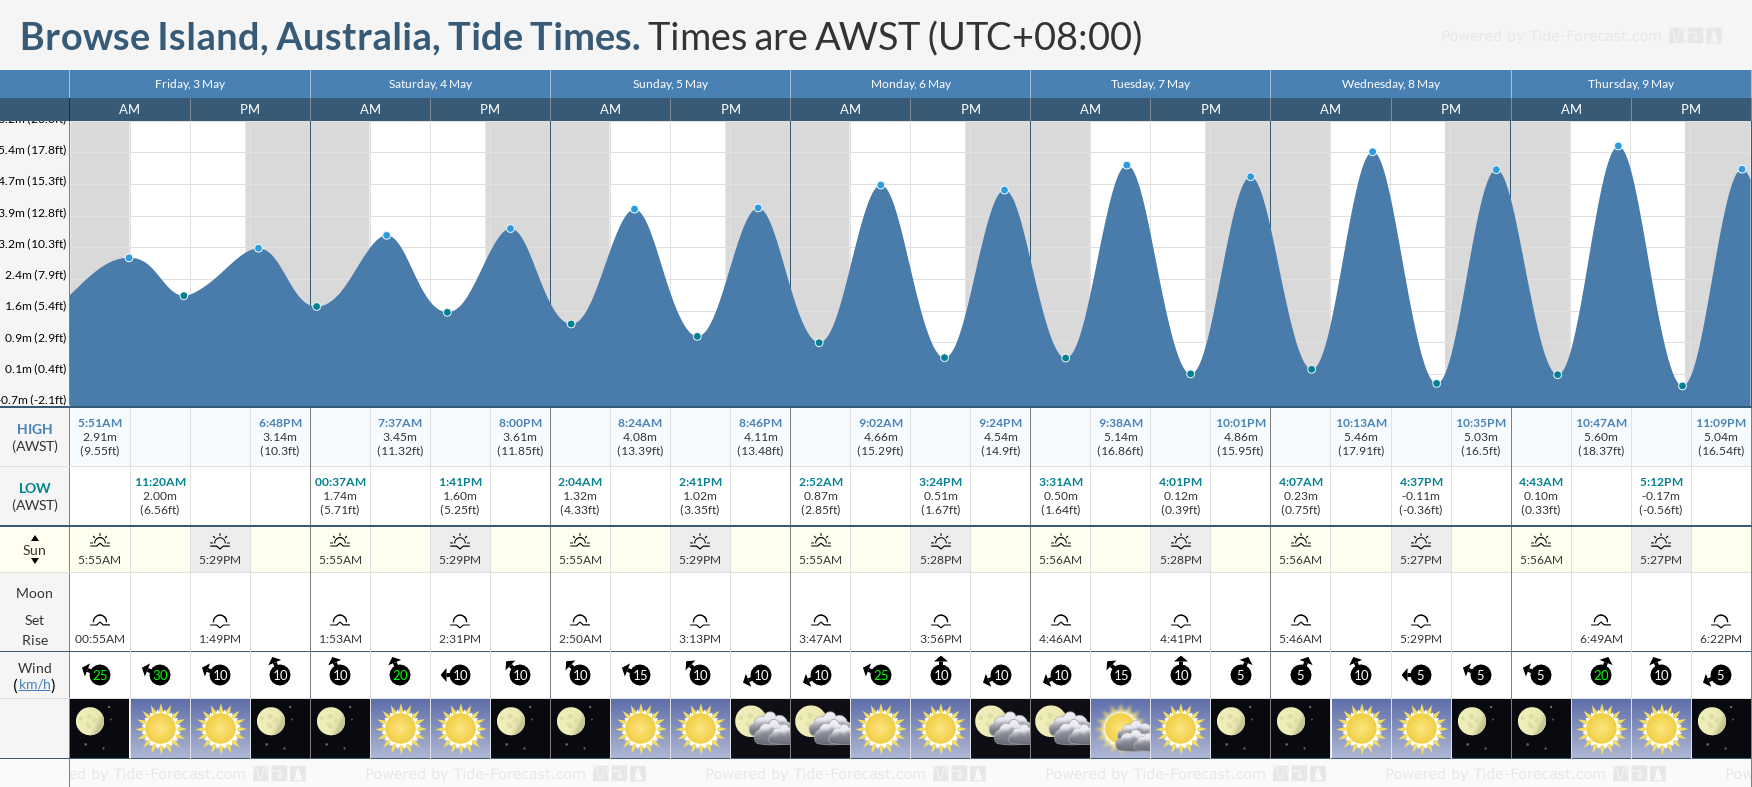 Browse Island, Australia Tide Chart including high and low tide tide times for the next 7 days